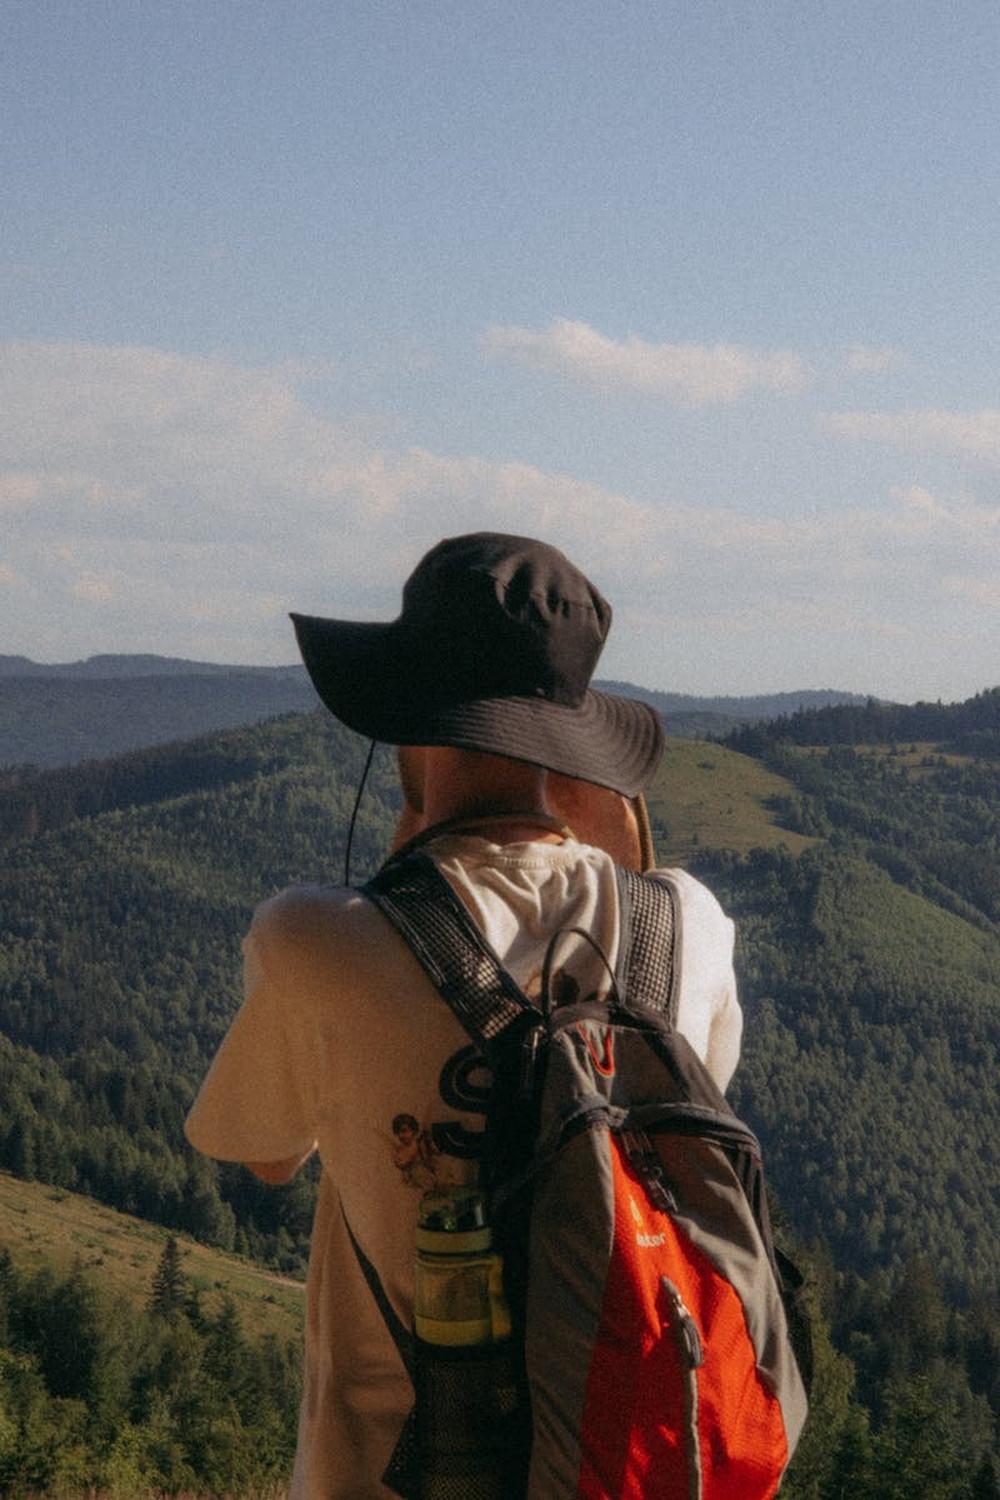 man_in_hat_and_with_backpack_standing_with_hills_b